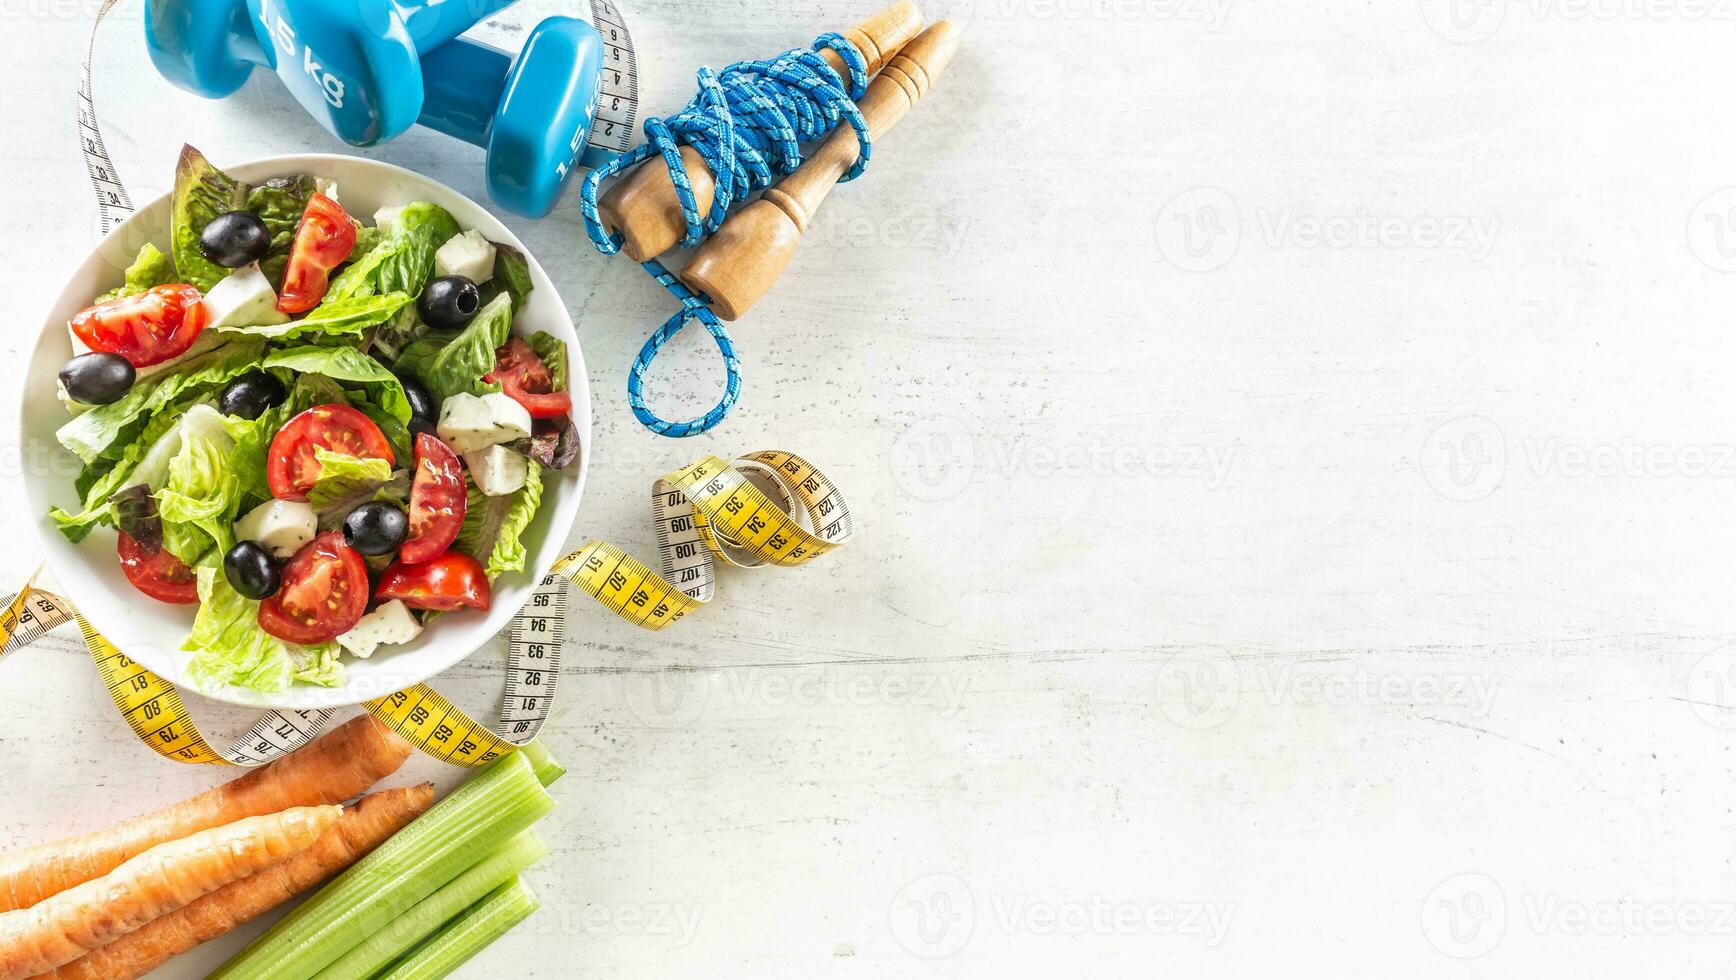 Healthy fresh salad with tomatoes surrounded with exercise equipment, carrtot celery and measuring tape - top of view photo